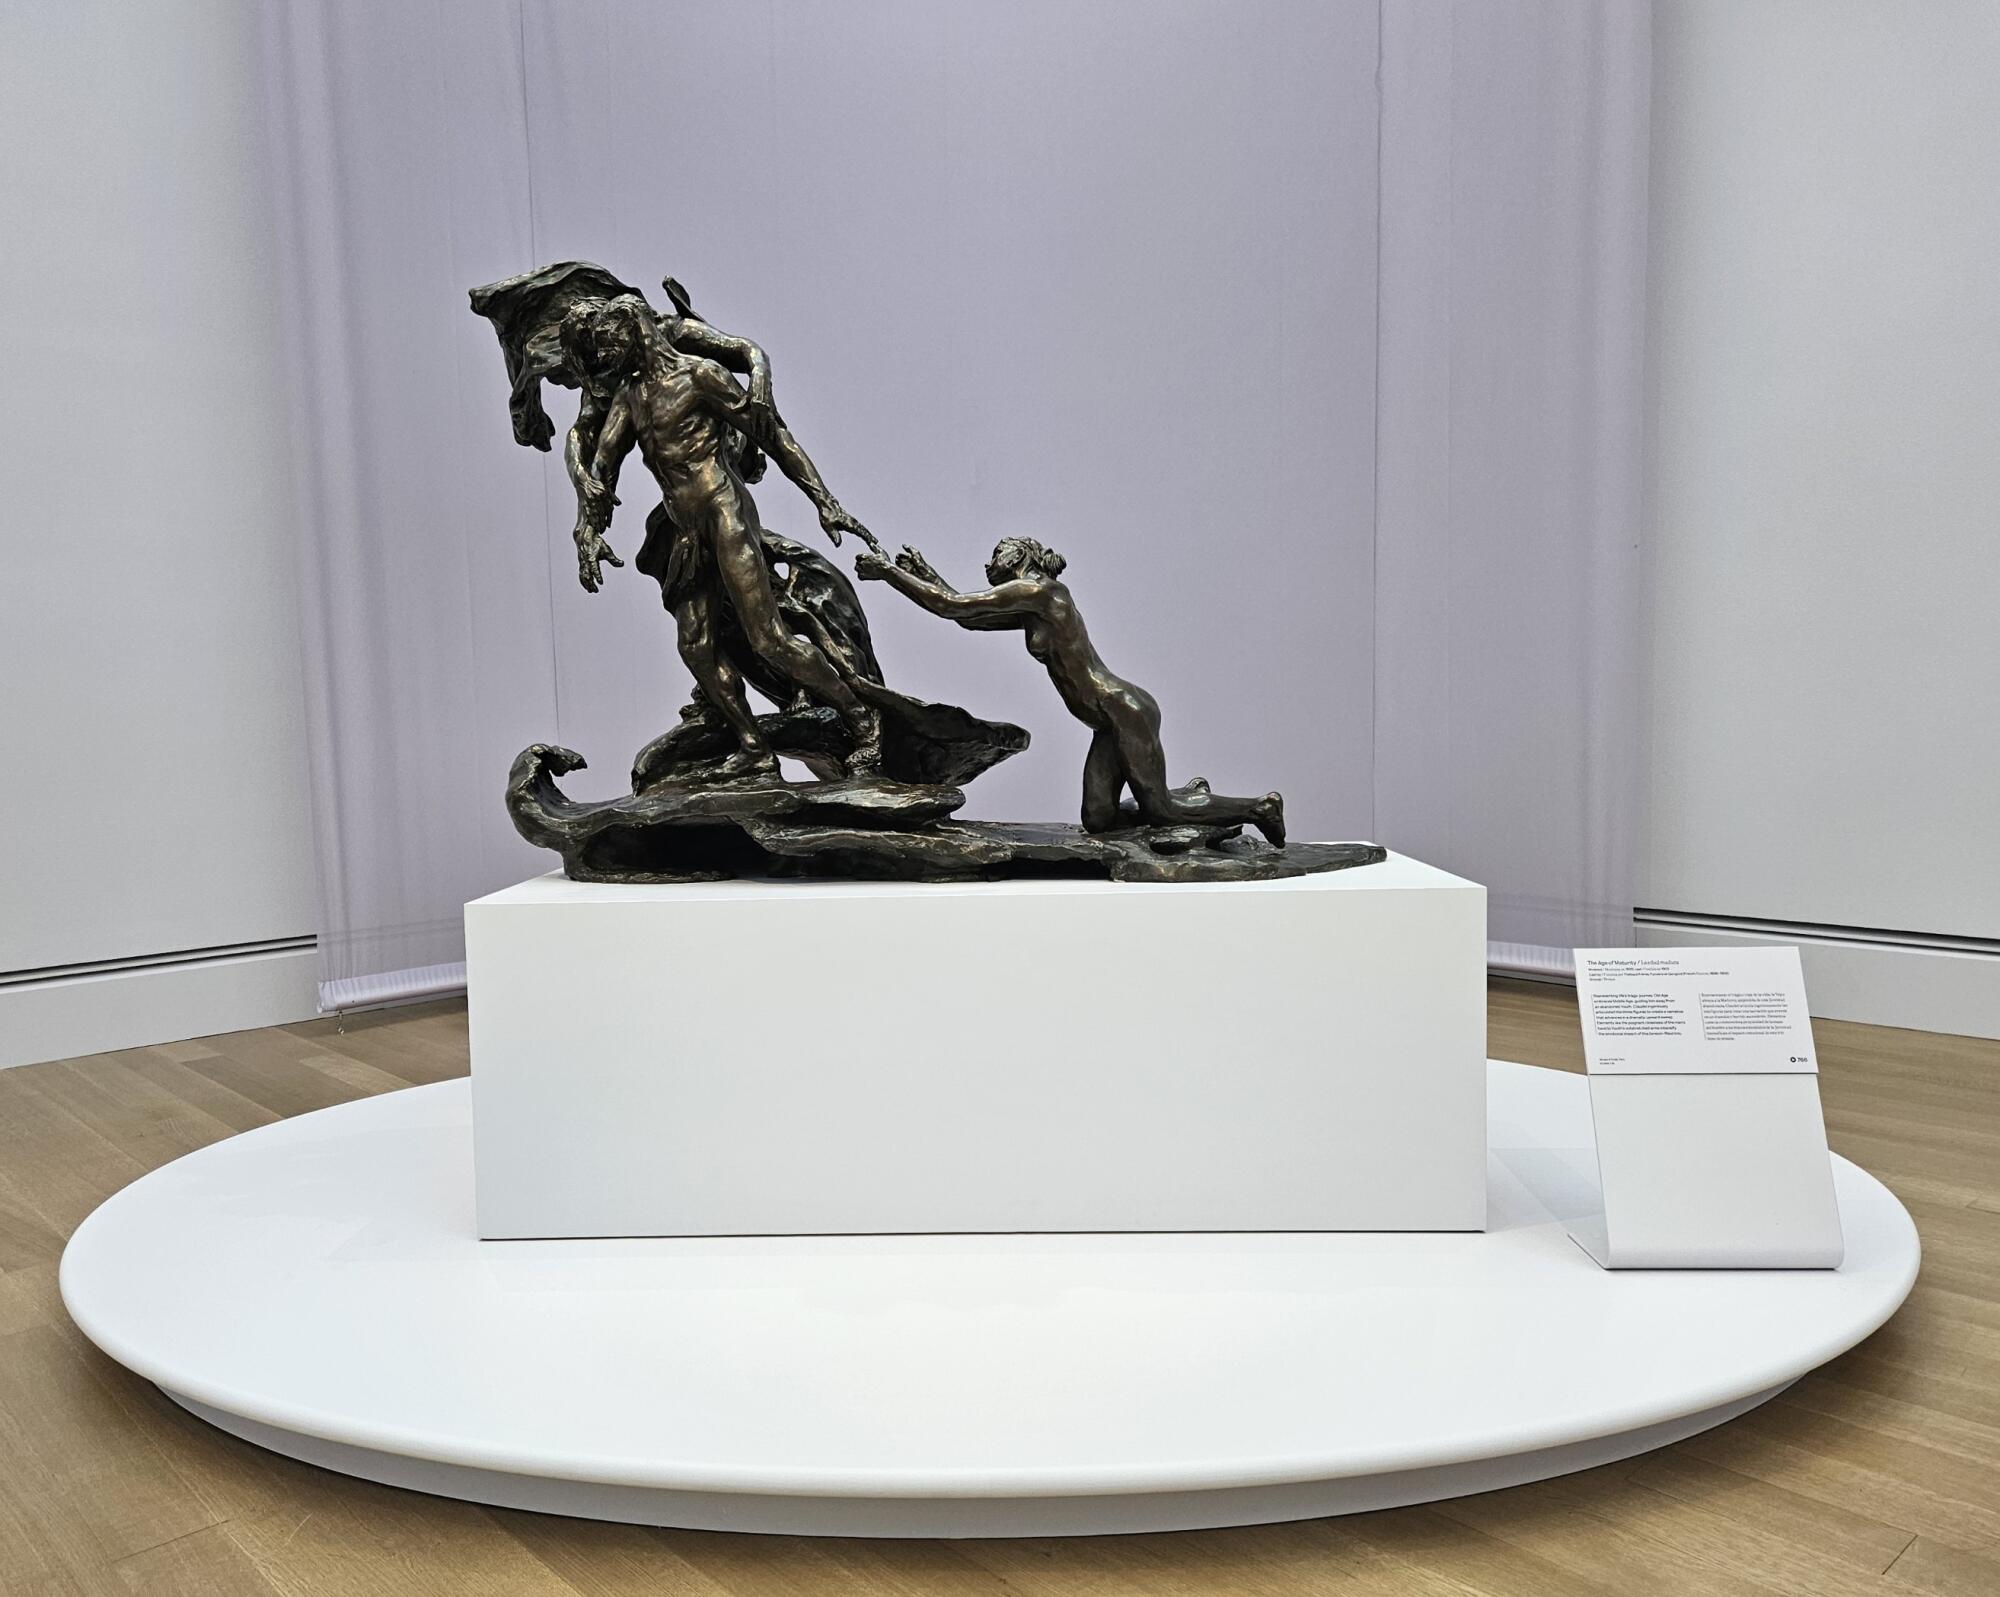 Camille Claudel, "The Age of Maturity," 1890-99, bronze